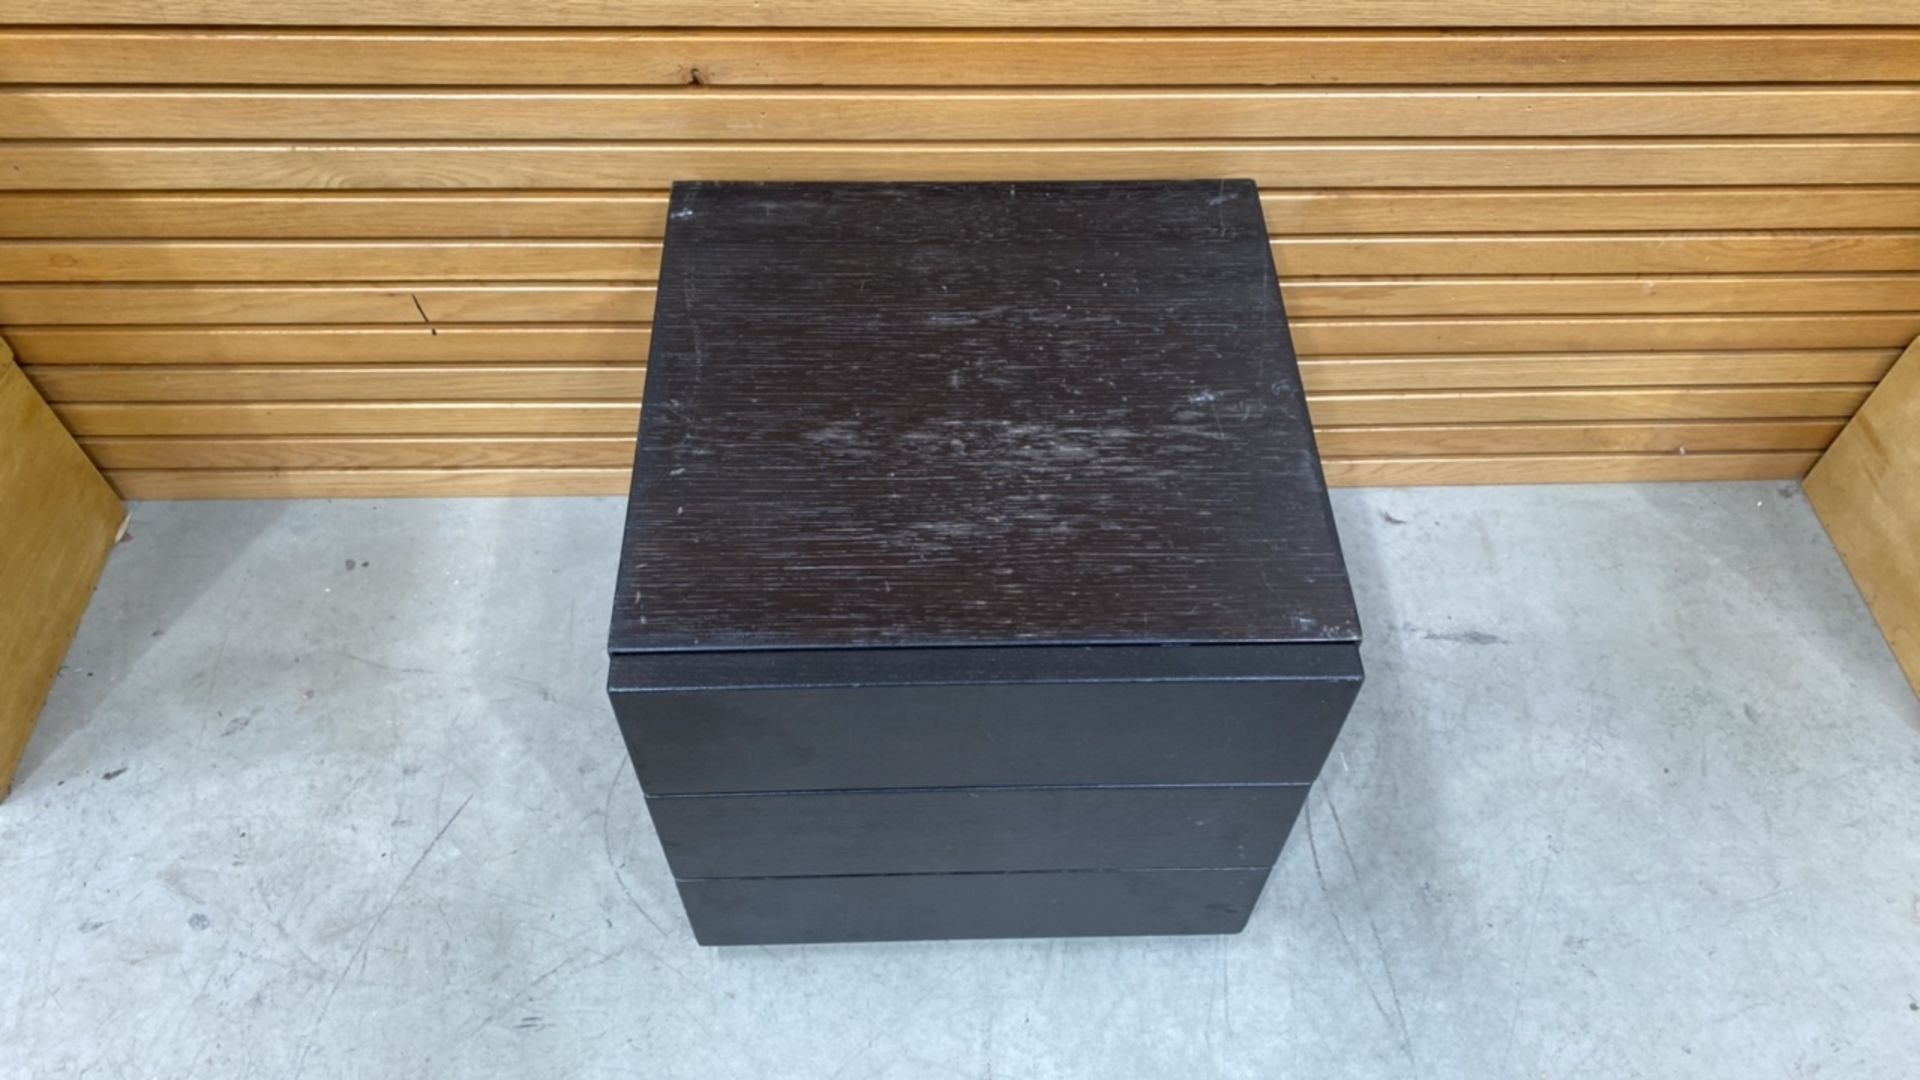 Black Wooden Cabinet With 2 Drawers - Image 2 of 4